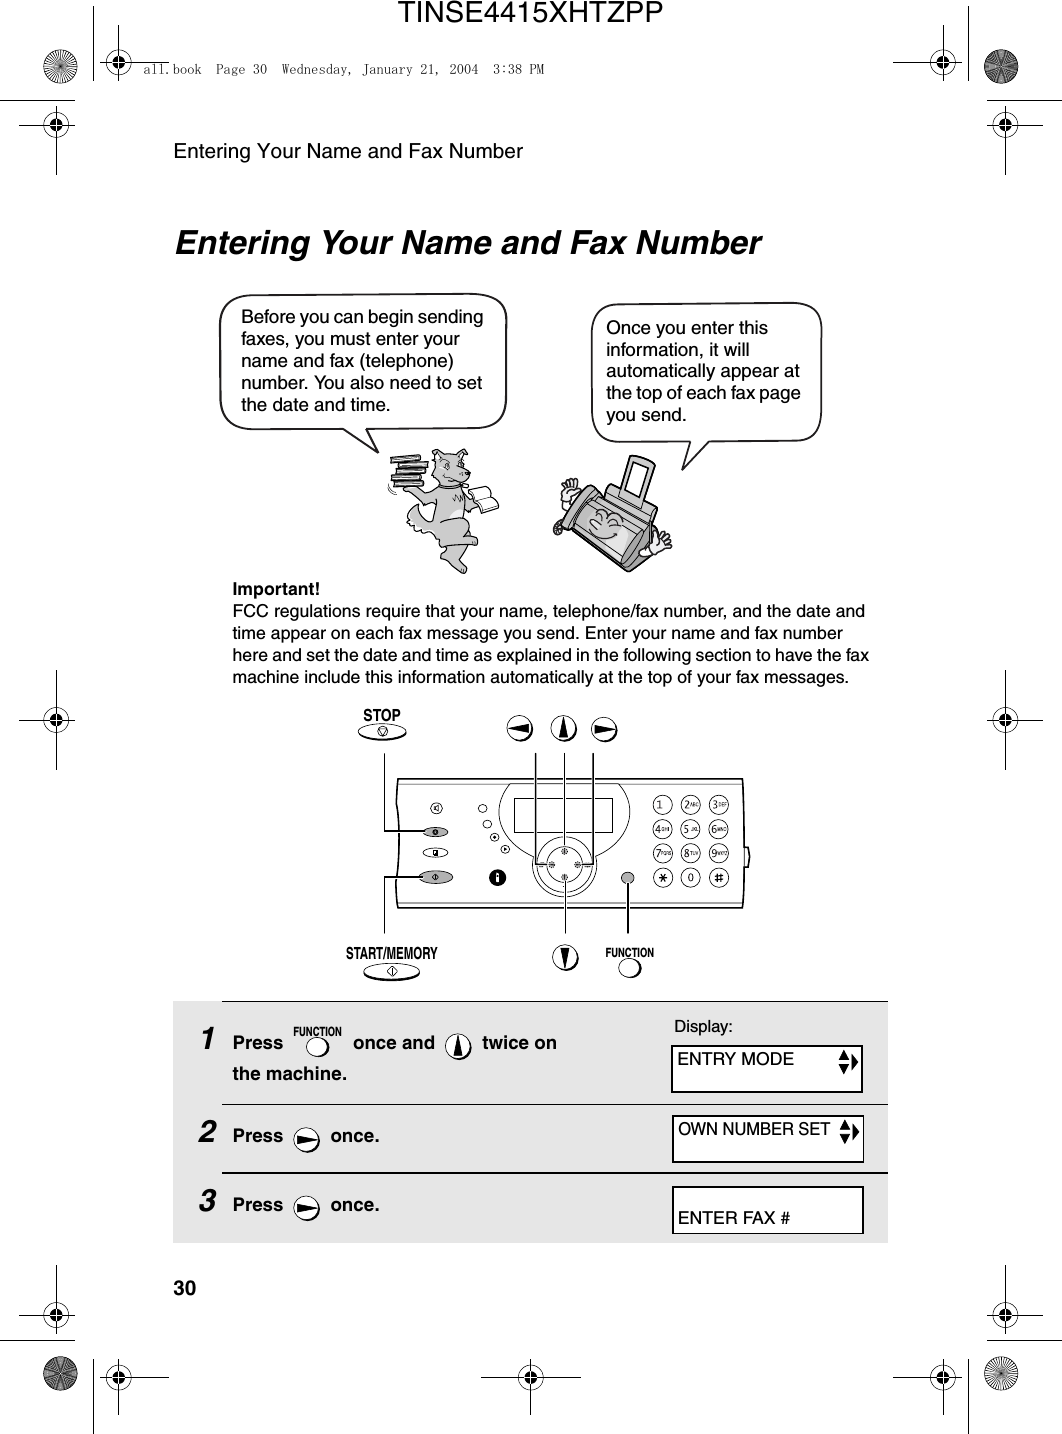 Entering Your Name and Fax Number30Entering Your Name and Fax NumberOnce you enter this information, it will automatically appear at the top of each fax page you send.Before you can begin sending faxes, you must enter your name and fax (telephone) number. You also need to set the date and time. FUNCTIONSTART/MEMORYSTOPImportant!FCC regulations require that your name, telephone/fax number, and the date and time appear on each fax message you send. Enter your name and fax number here and set the date and time as explained in the following section to have the fax machine include this information automatically at the top of your fax messages.1Press   once and   twice on the machine.2Press  once.3Press  once.FUNCTIONDisplay:ENTRY MODEOWN NUMBER SETENTER FAX #all.book  Page 30  Wednesday, January 21, 2004  3:38 PMTINSE4415XHTZPP